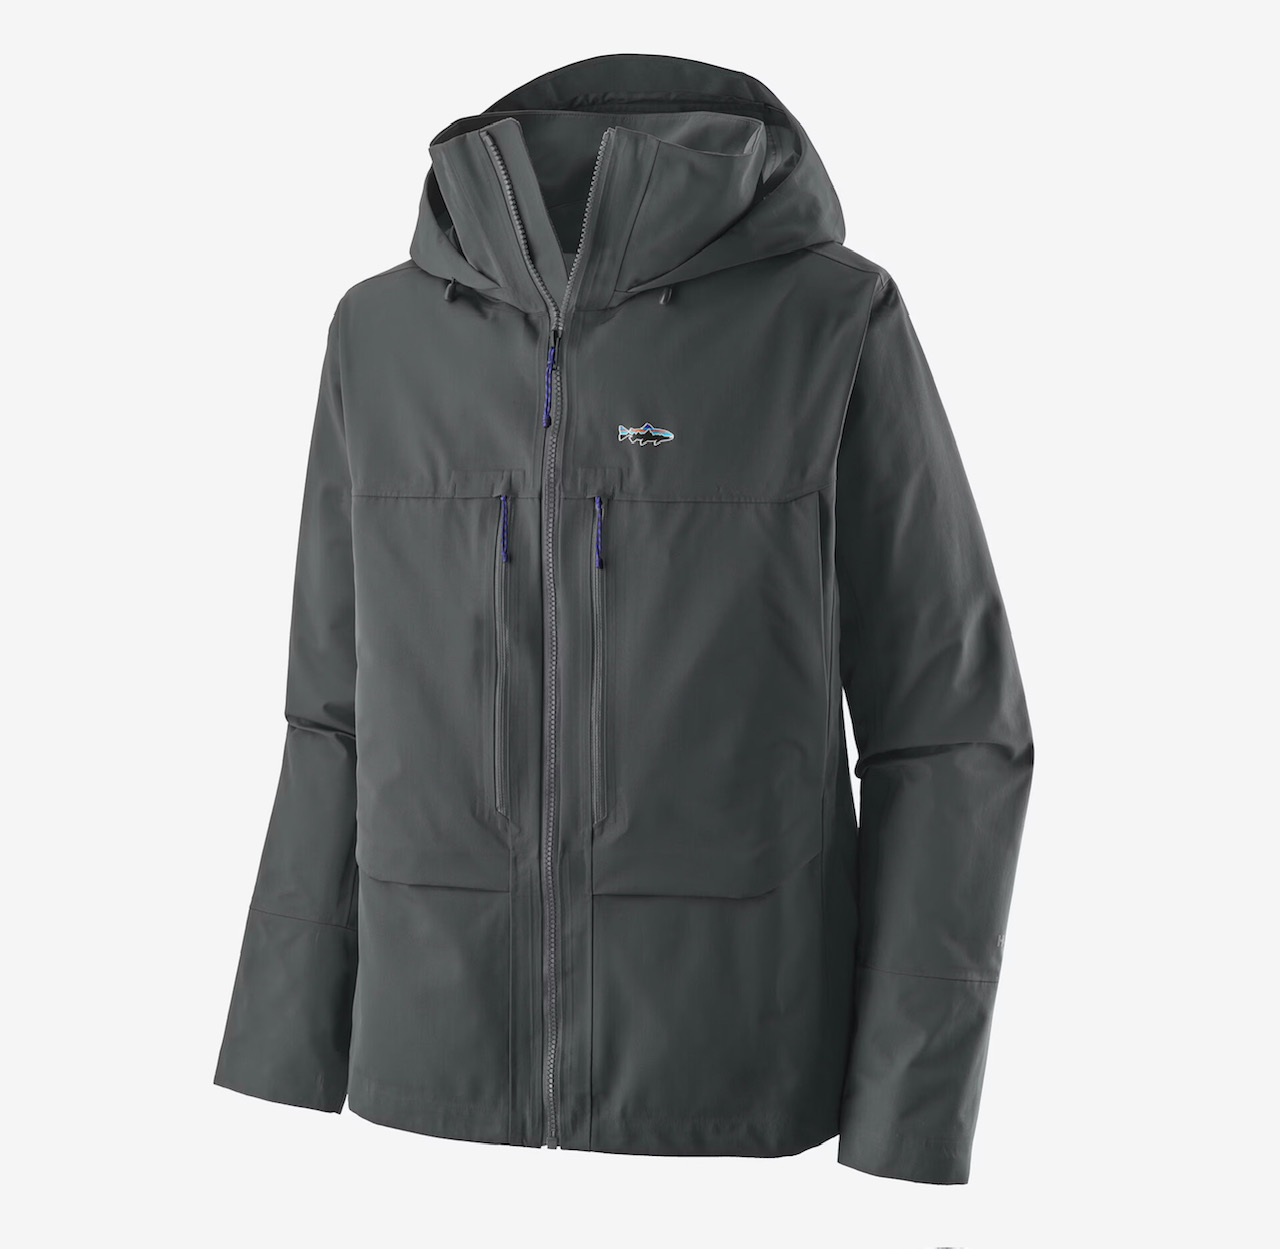 Patagonia M's Swiftcurrent Wading Jacket - Forge Grey - XL